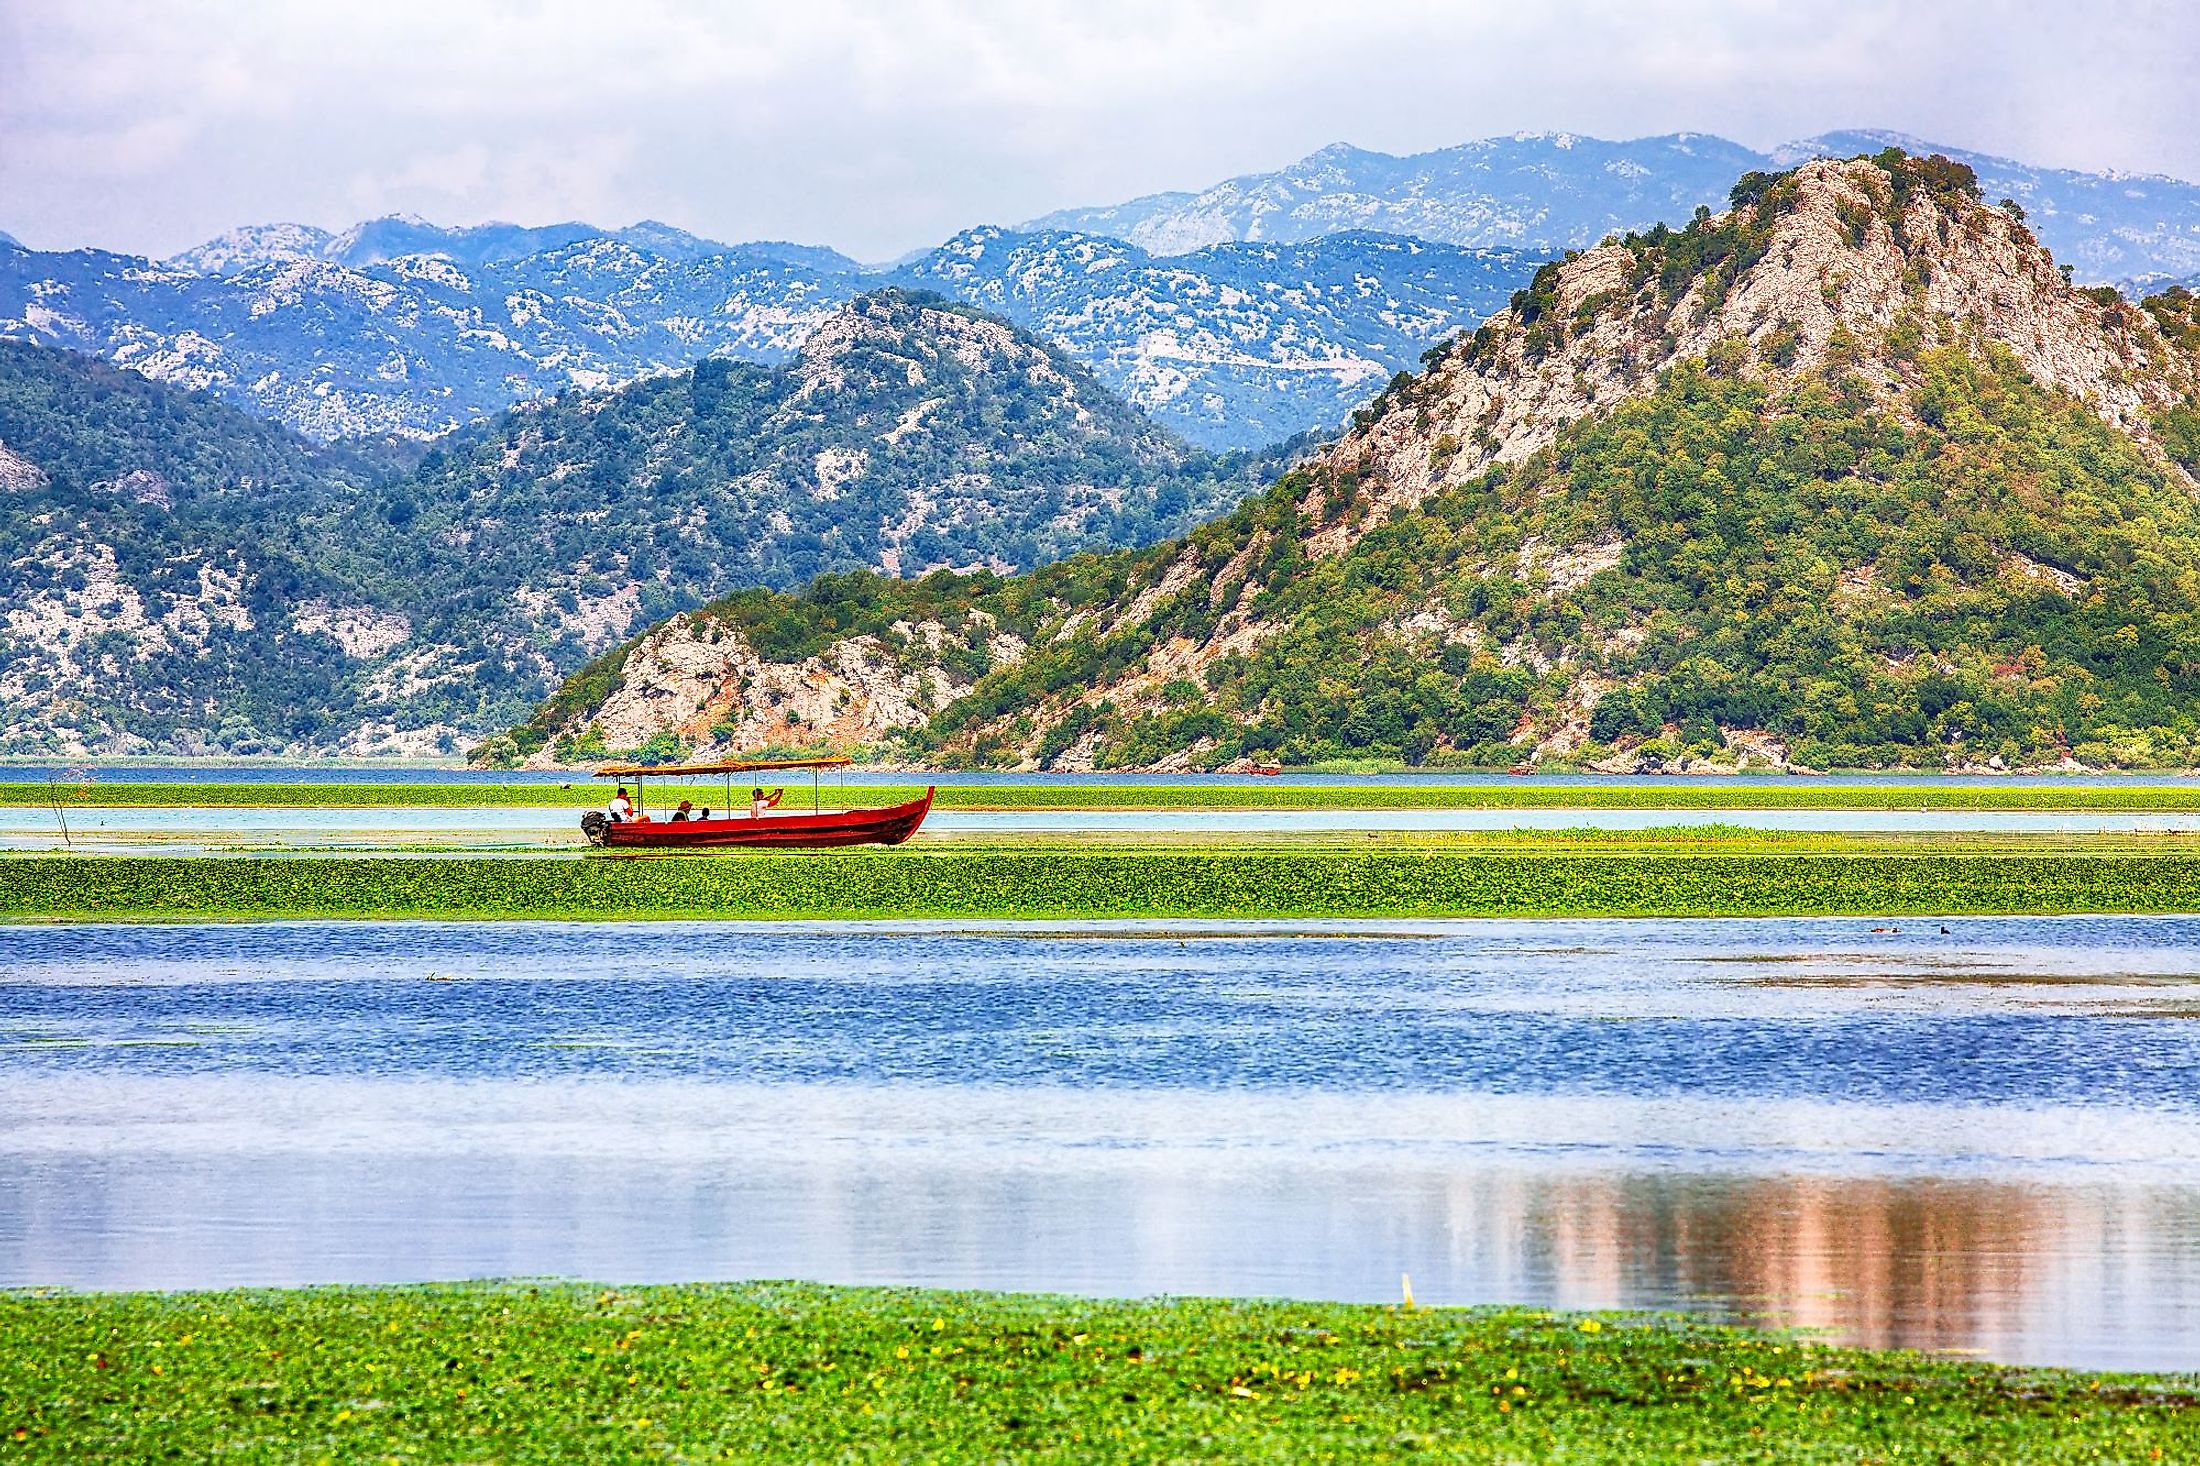 Awesome view of Skadar Lake surrounded by green mountain peaks in Skadar Lake National Park, Montenegro. 